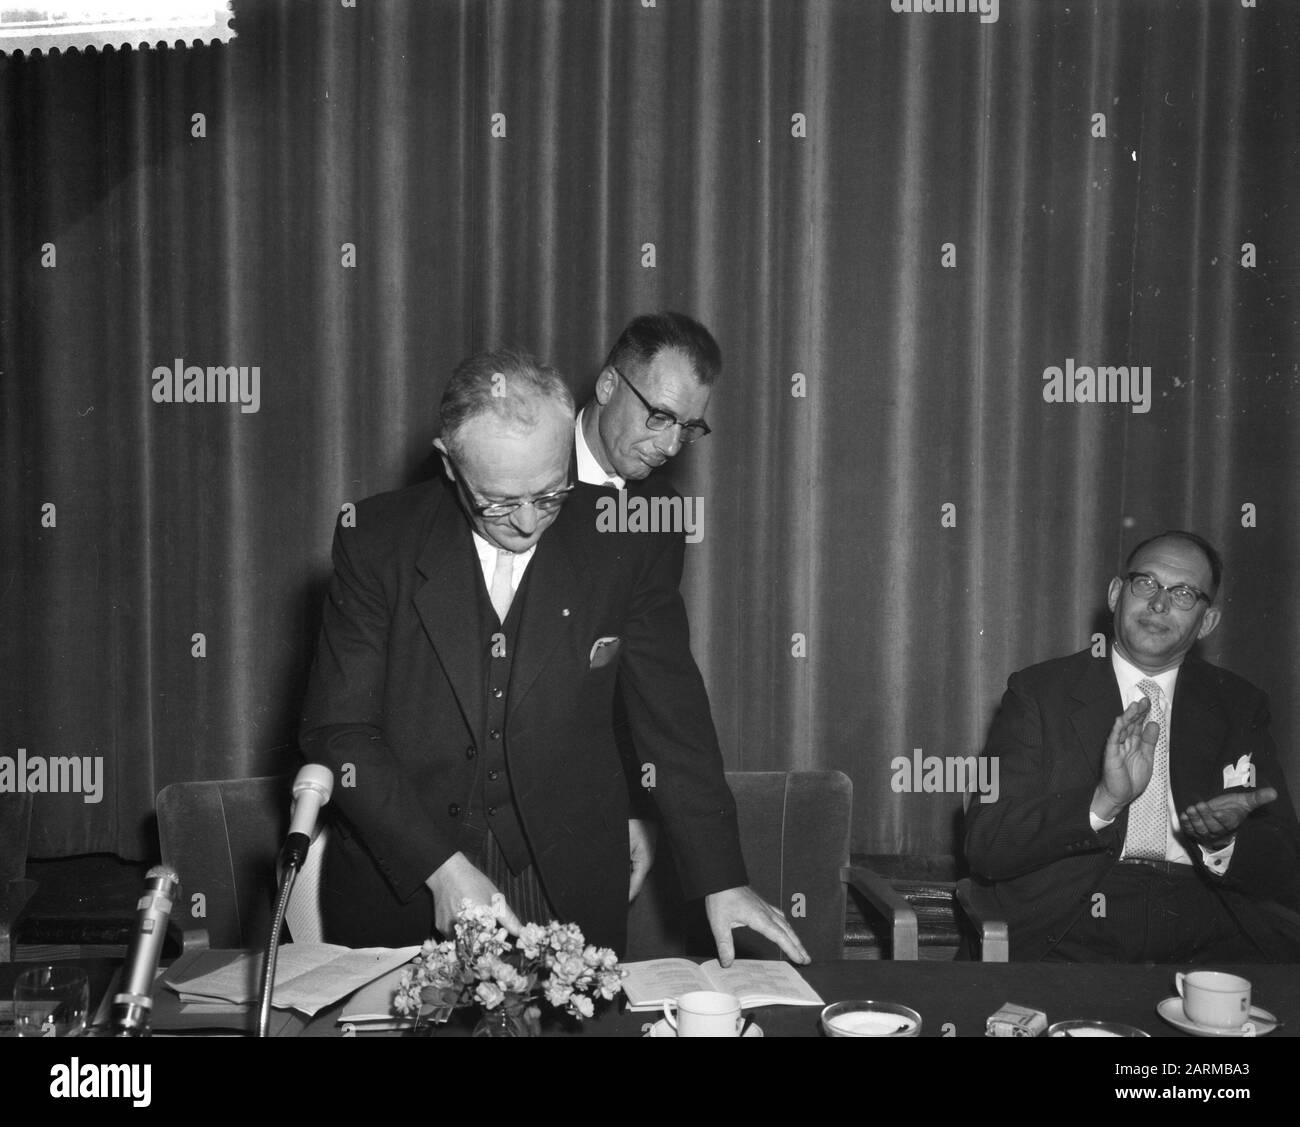 Election in the General Members' Meeting of the CNV in Utrecht of a new president Date: September 21, 1959 Location: Utrecht Keywords: Elections, Members' Meetings, Chairmen Institution name: CNV Stock Photo